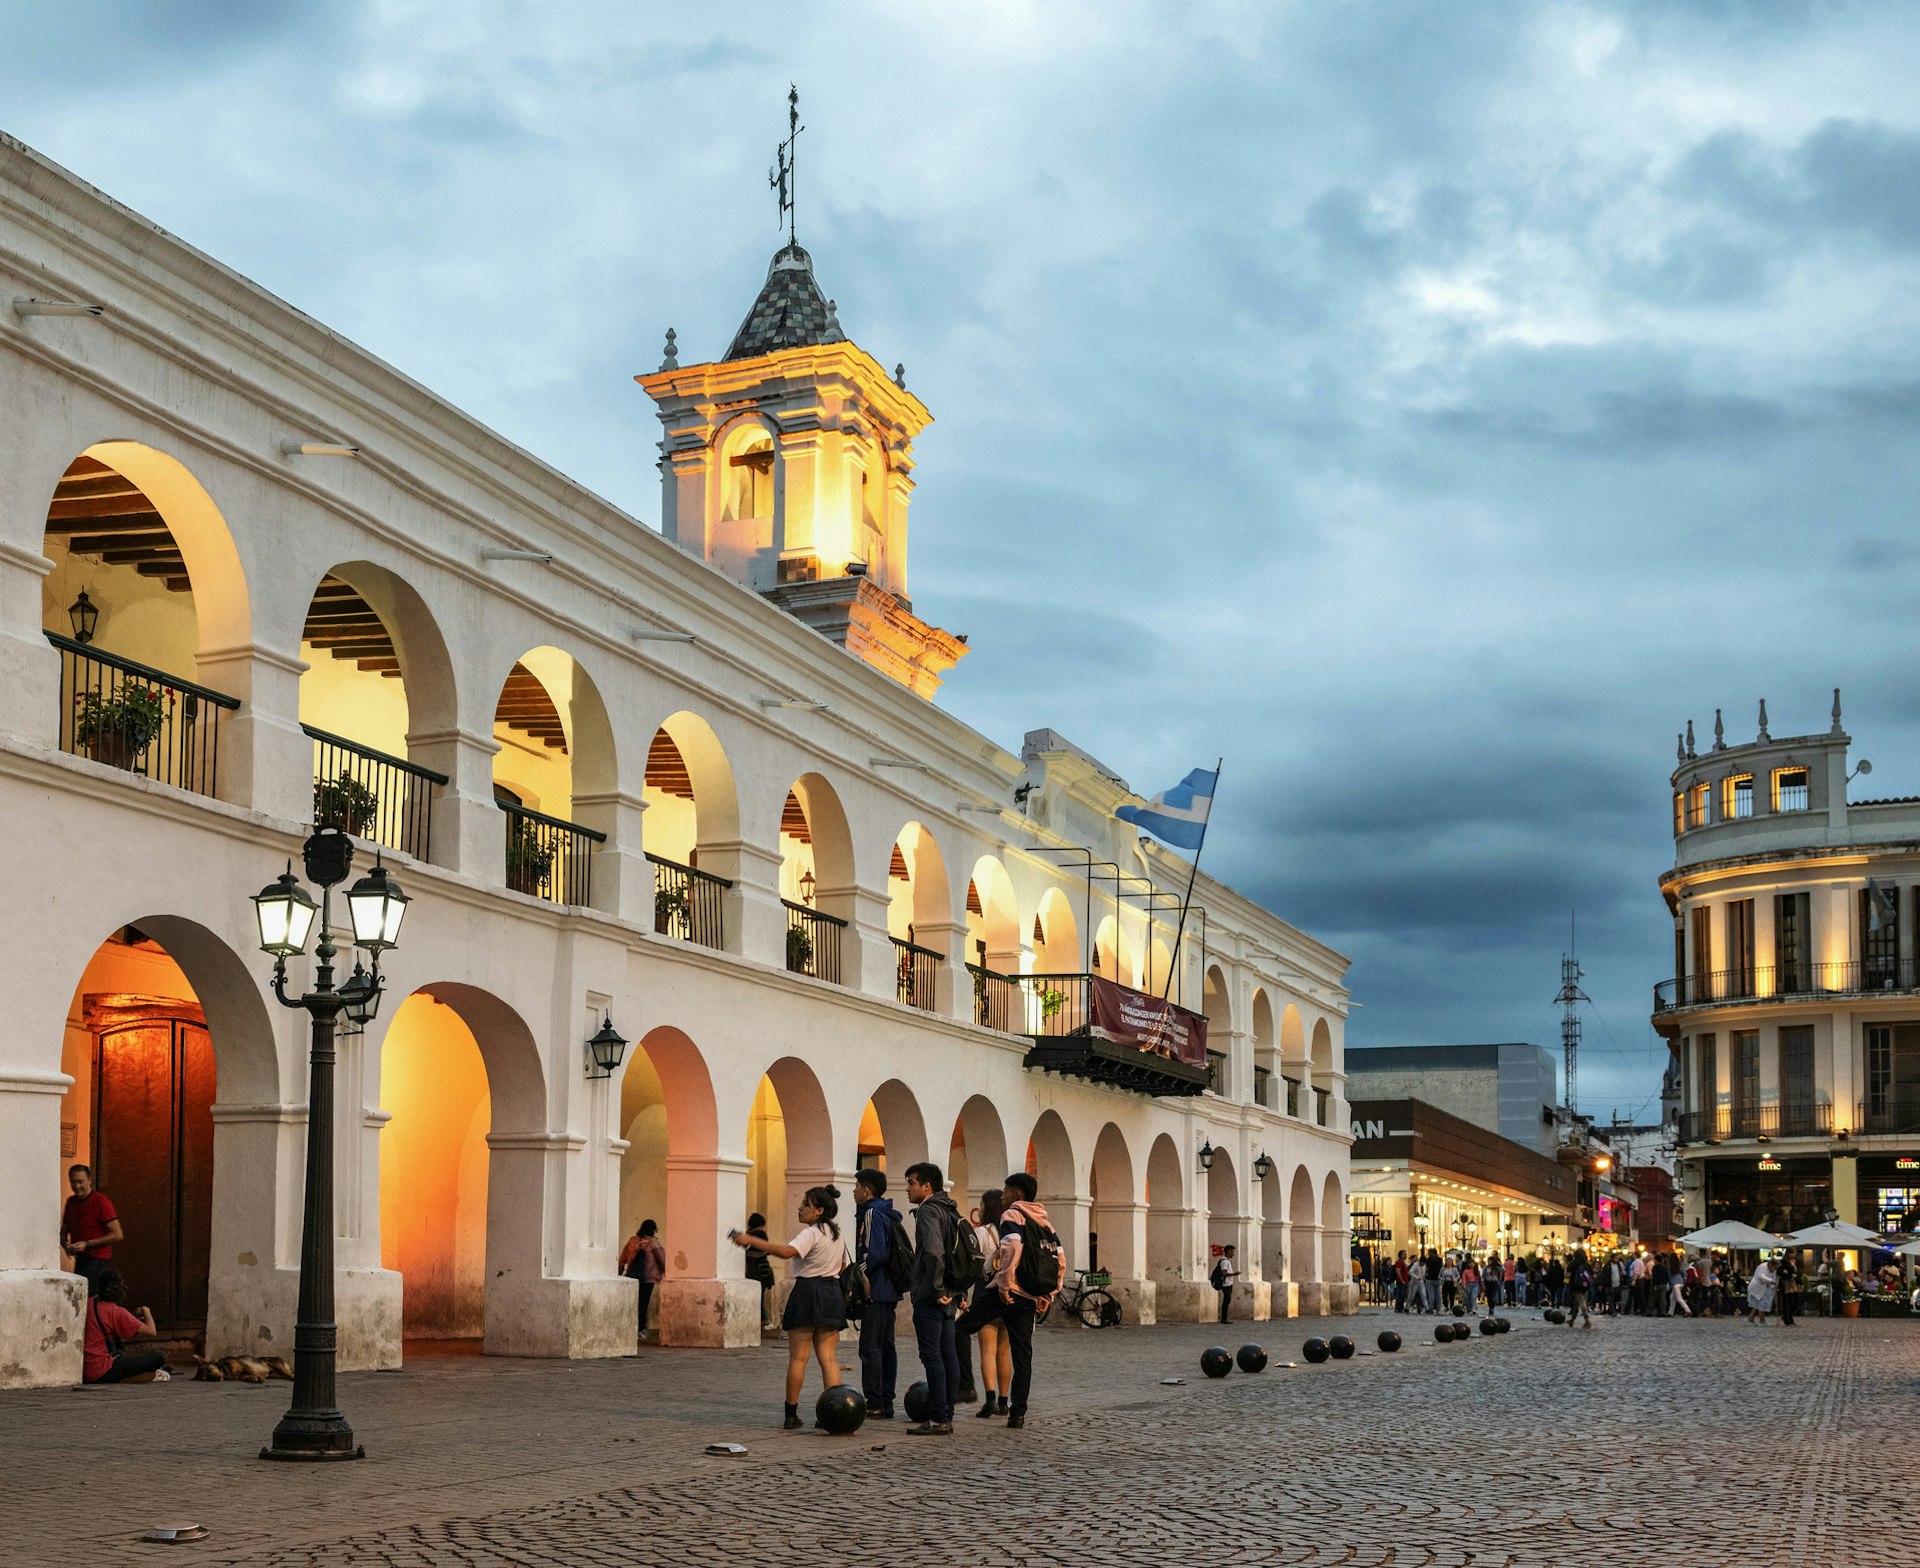 View of the arcade of the History Museum on the main square in the center of this Argentinian town early on a cloudy evening.